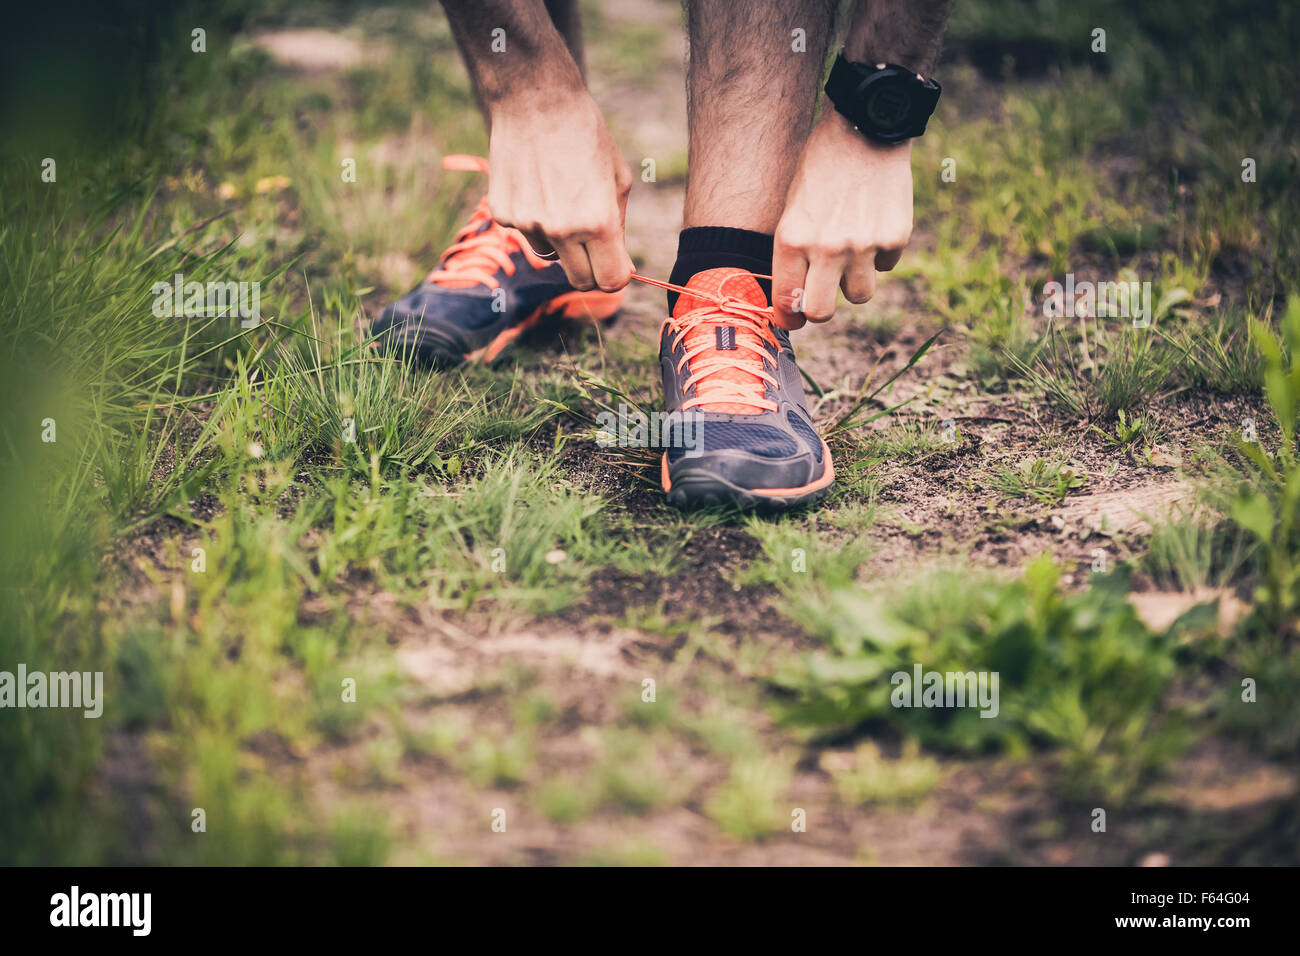 Runner tying sports shoe. Man running on cross country path in summer nature. Young athlete male training and fitness workout Stock Photo